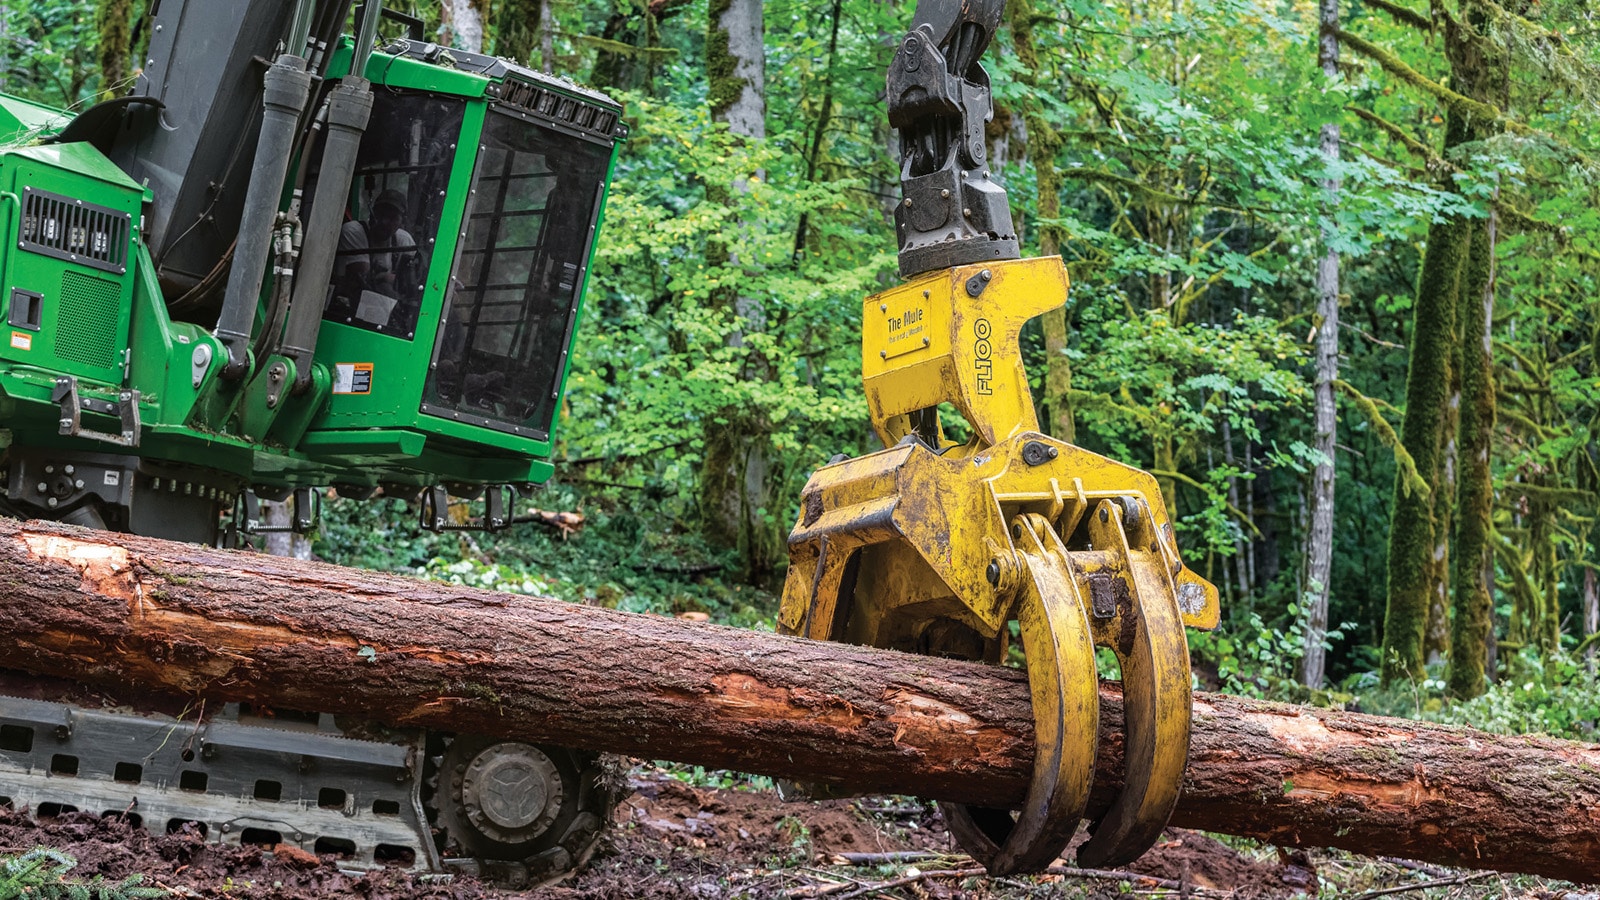 Close up of FL100 Felling Head forestry attachment working in the woods